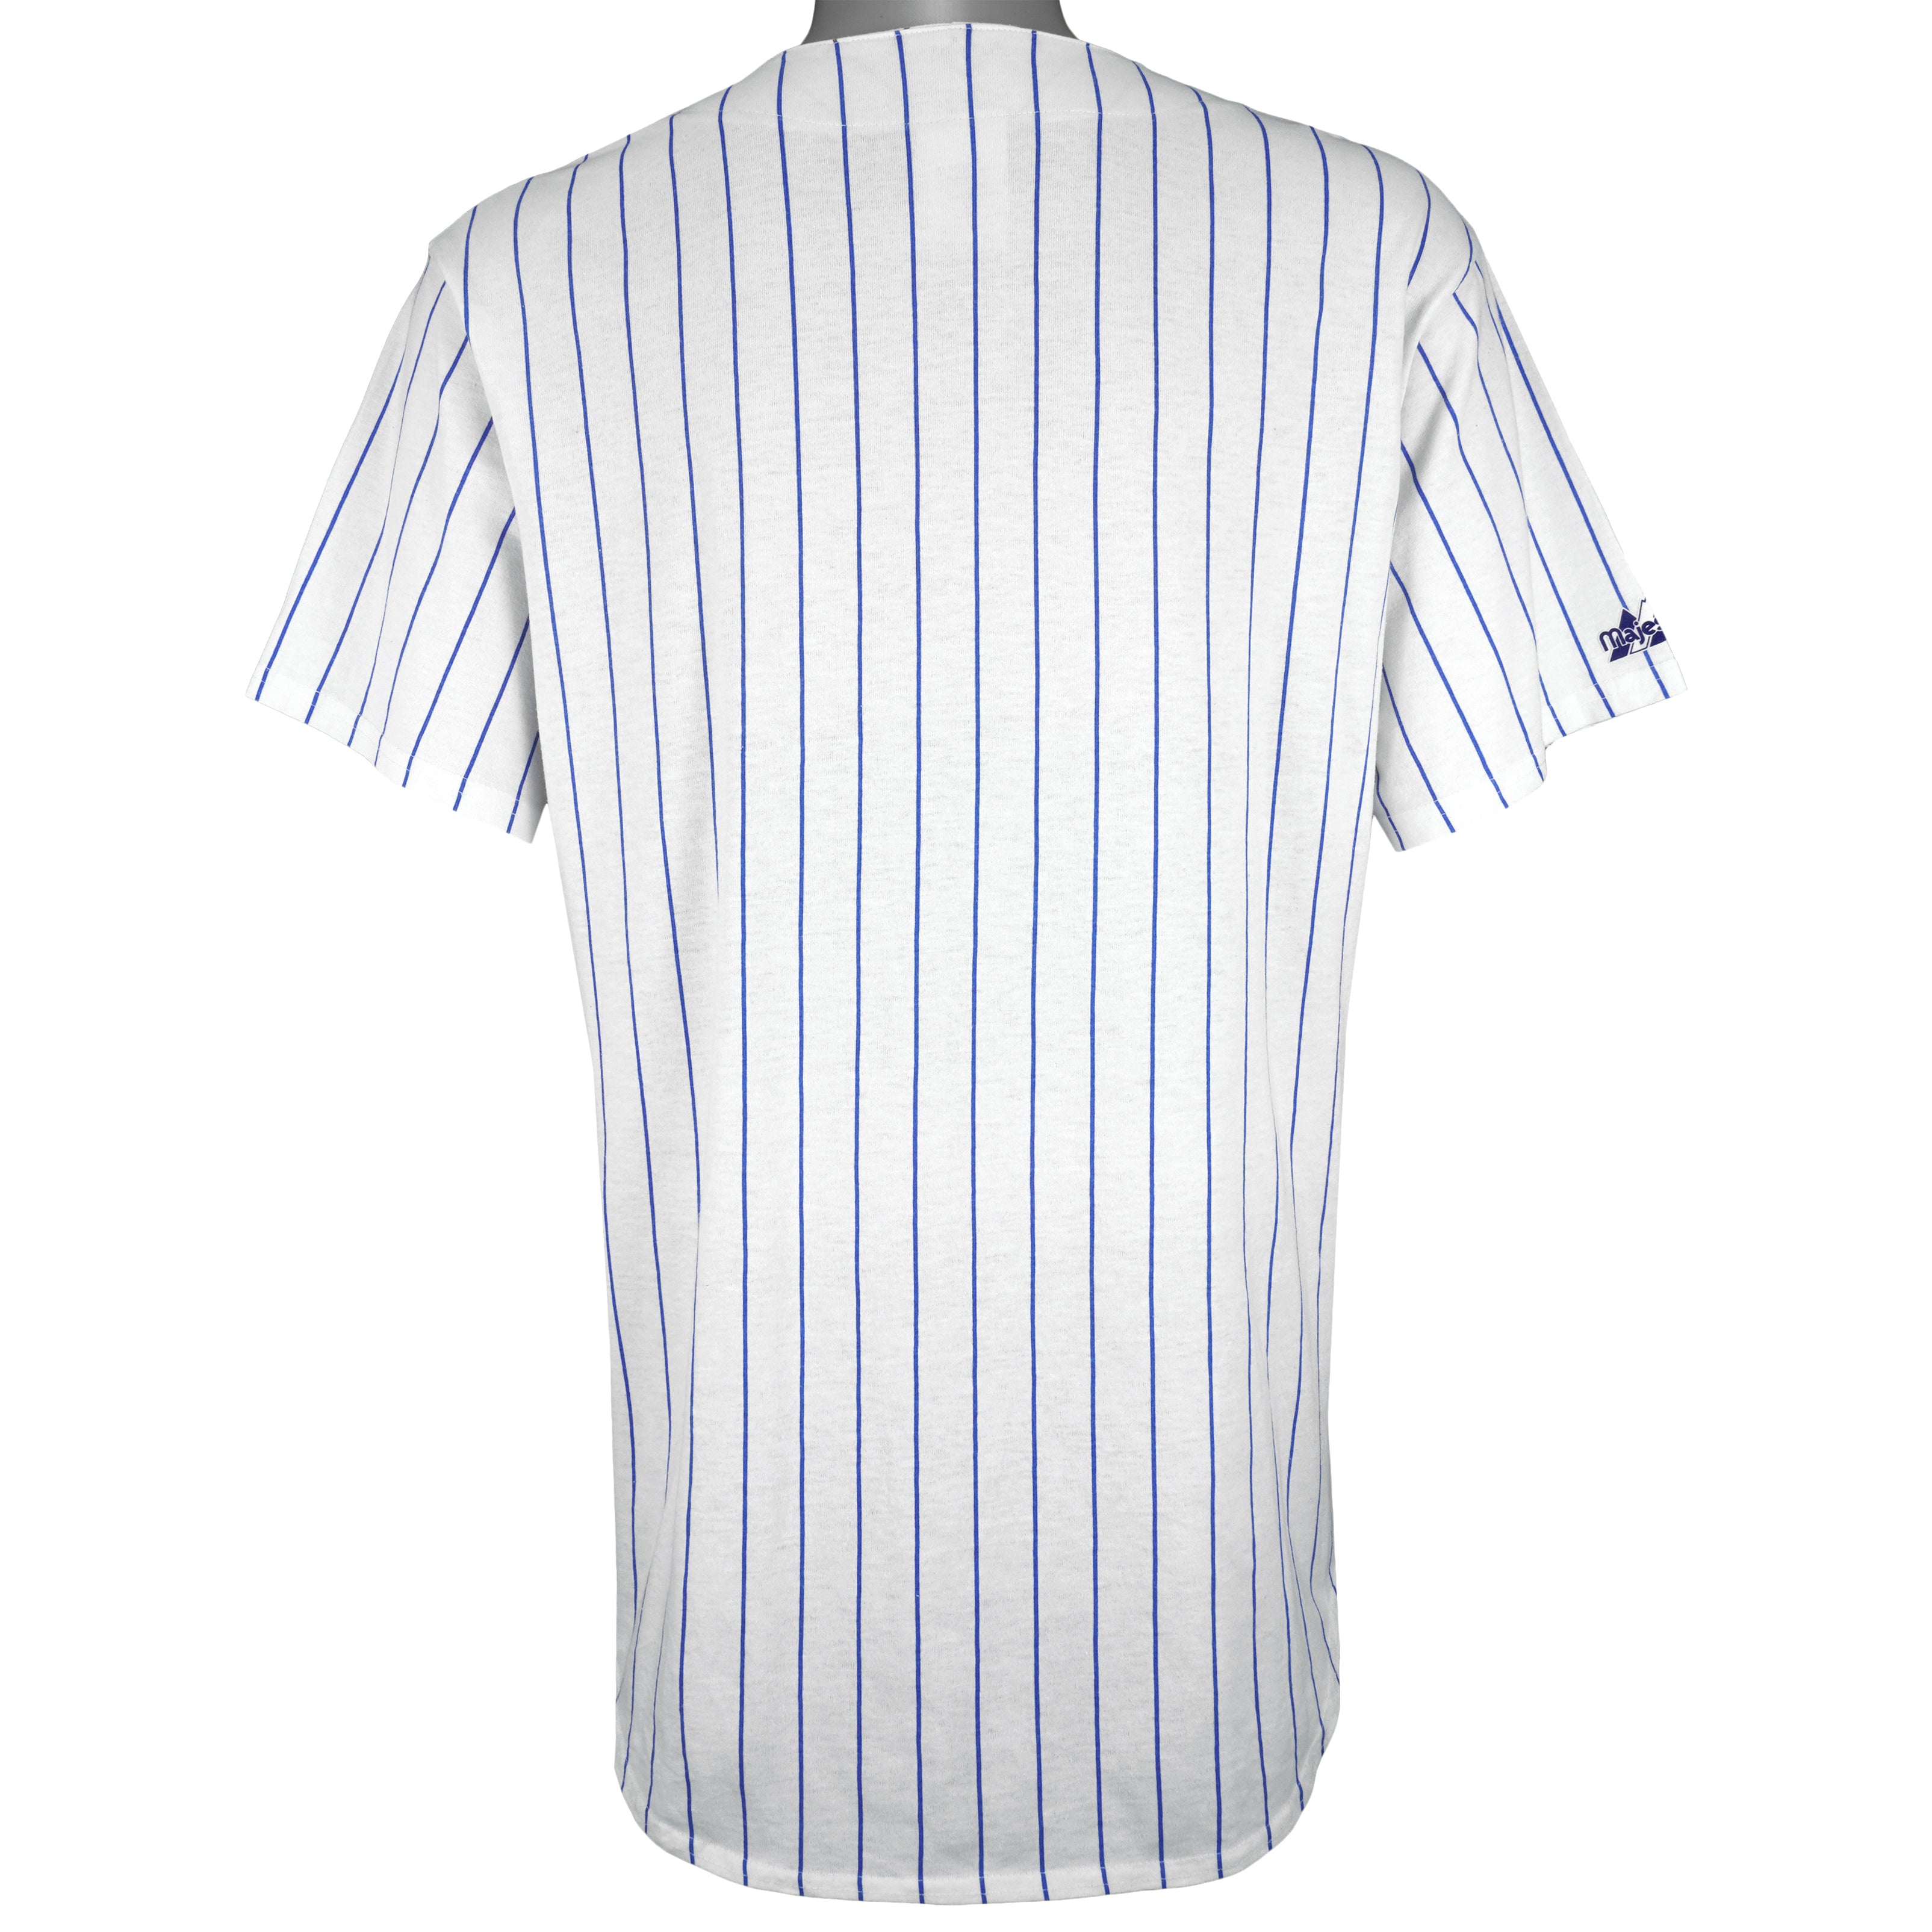 chicago cubs pinstripe jersey